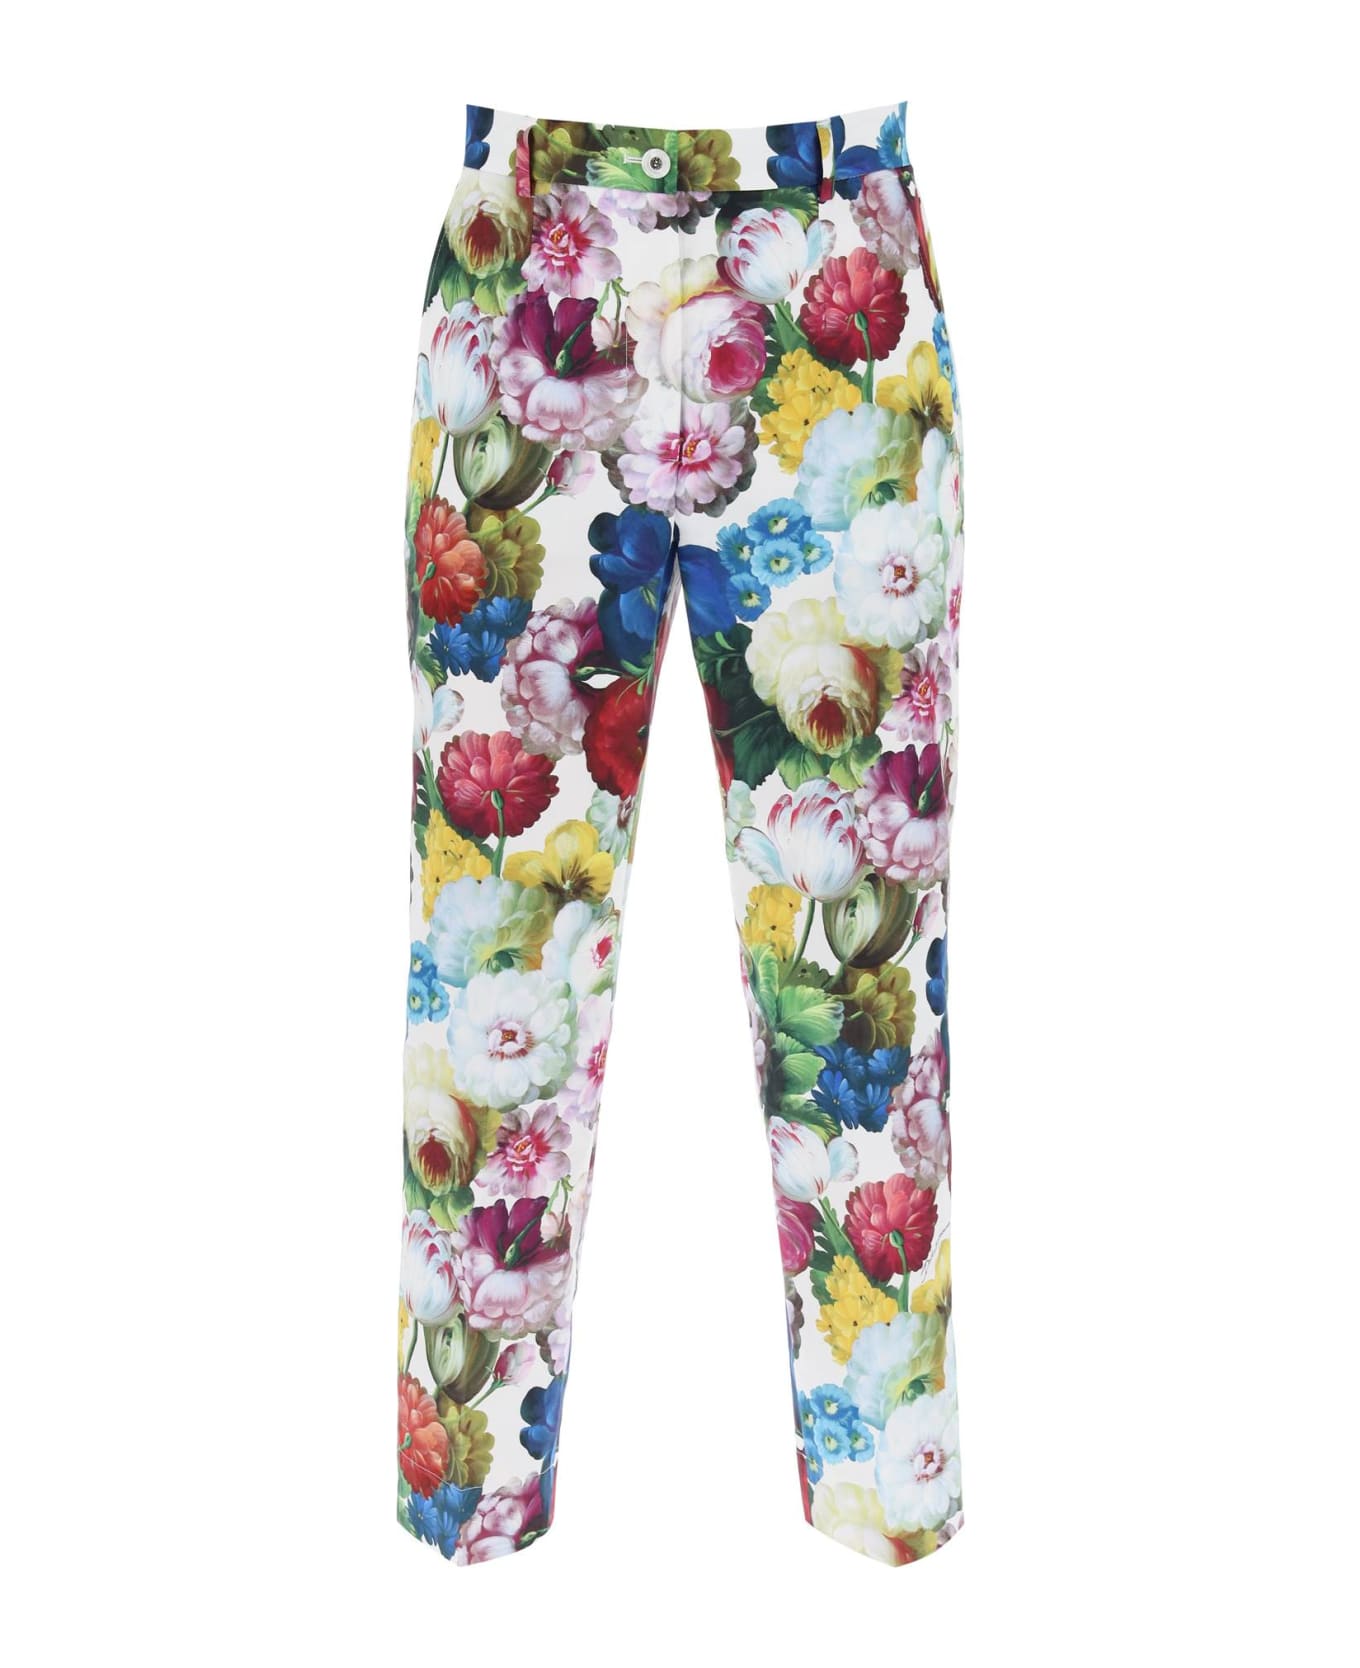 Dolce & Gabbana Nocturnal Flower Cigarette Pants - FIORE NOTTURNO F BCO ボトムス